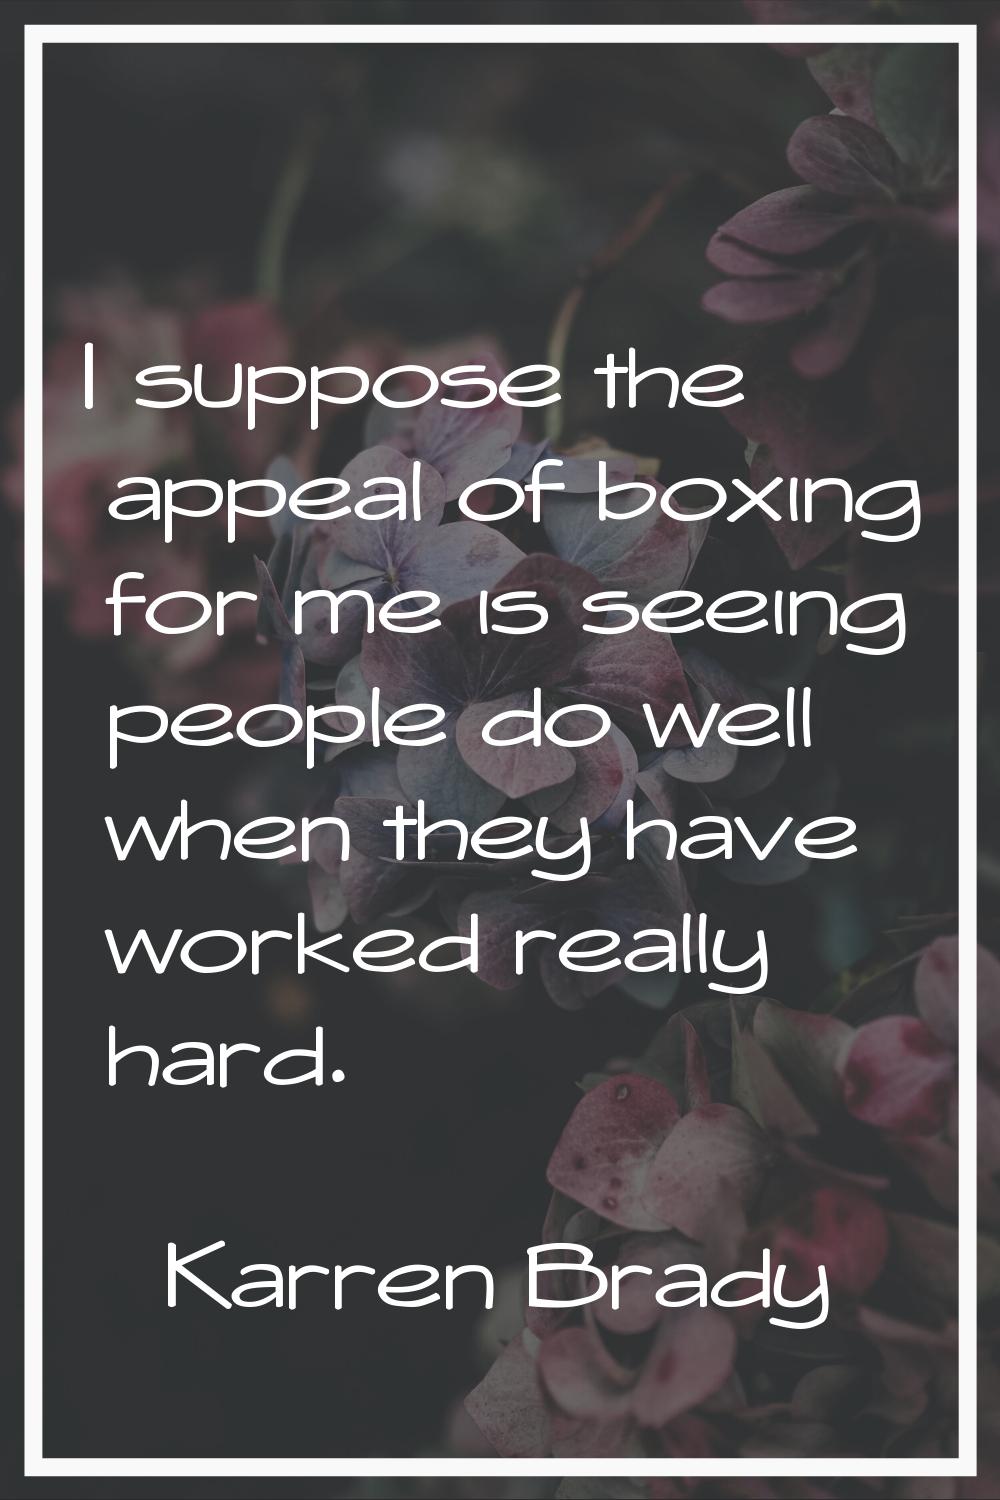 I suppose the appeal of boxing for me is seeing people do well when they have worked really hard.